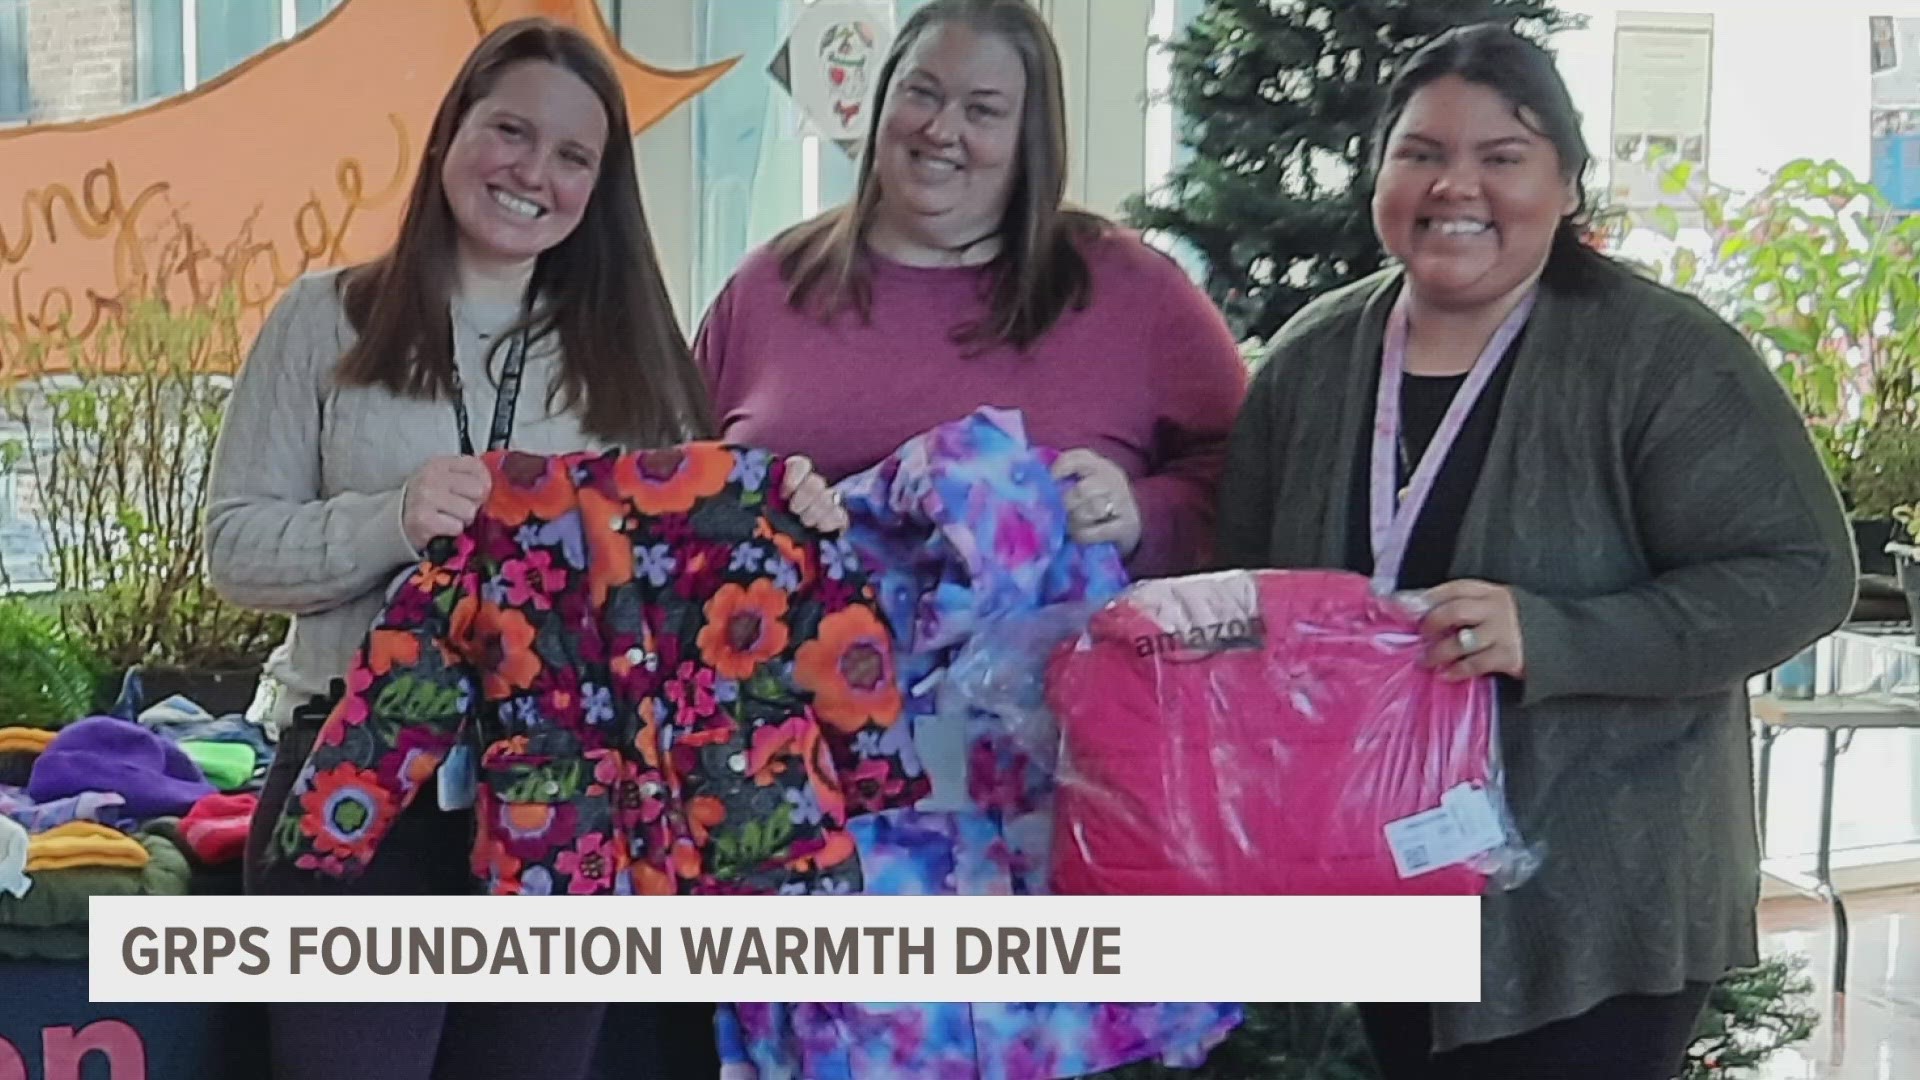 From now until March 1, you can donate new and gently used coats, hats, mittens and socks that will be distributed to elementary school students in need.